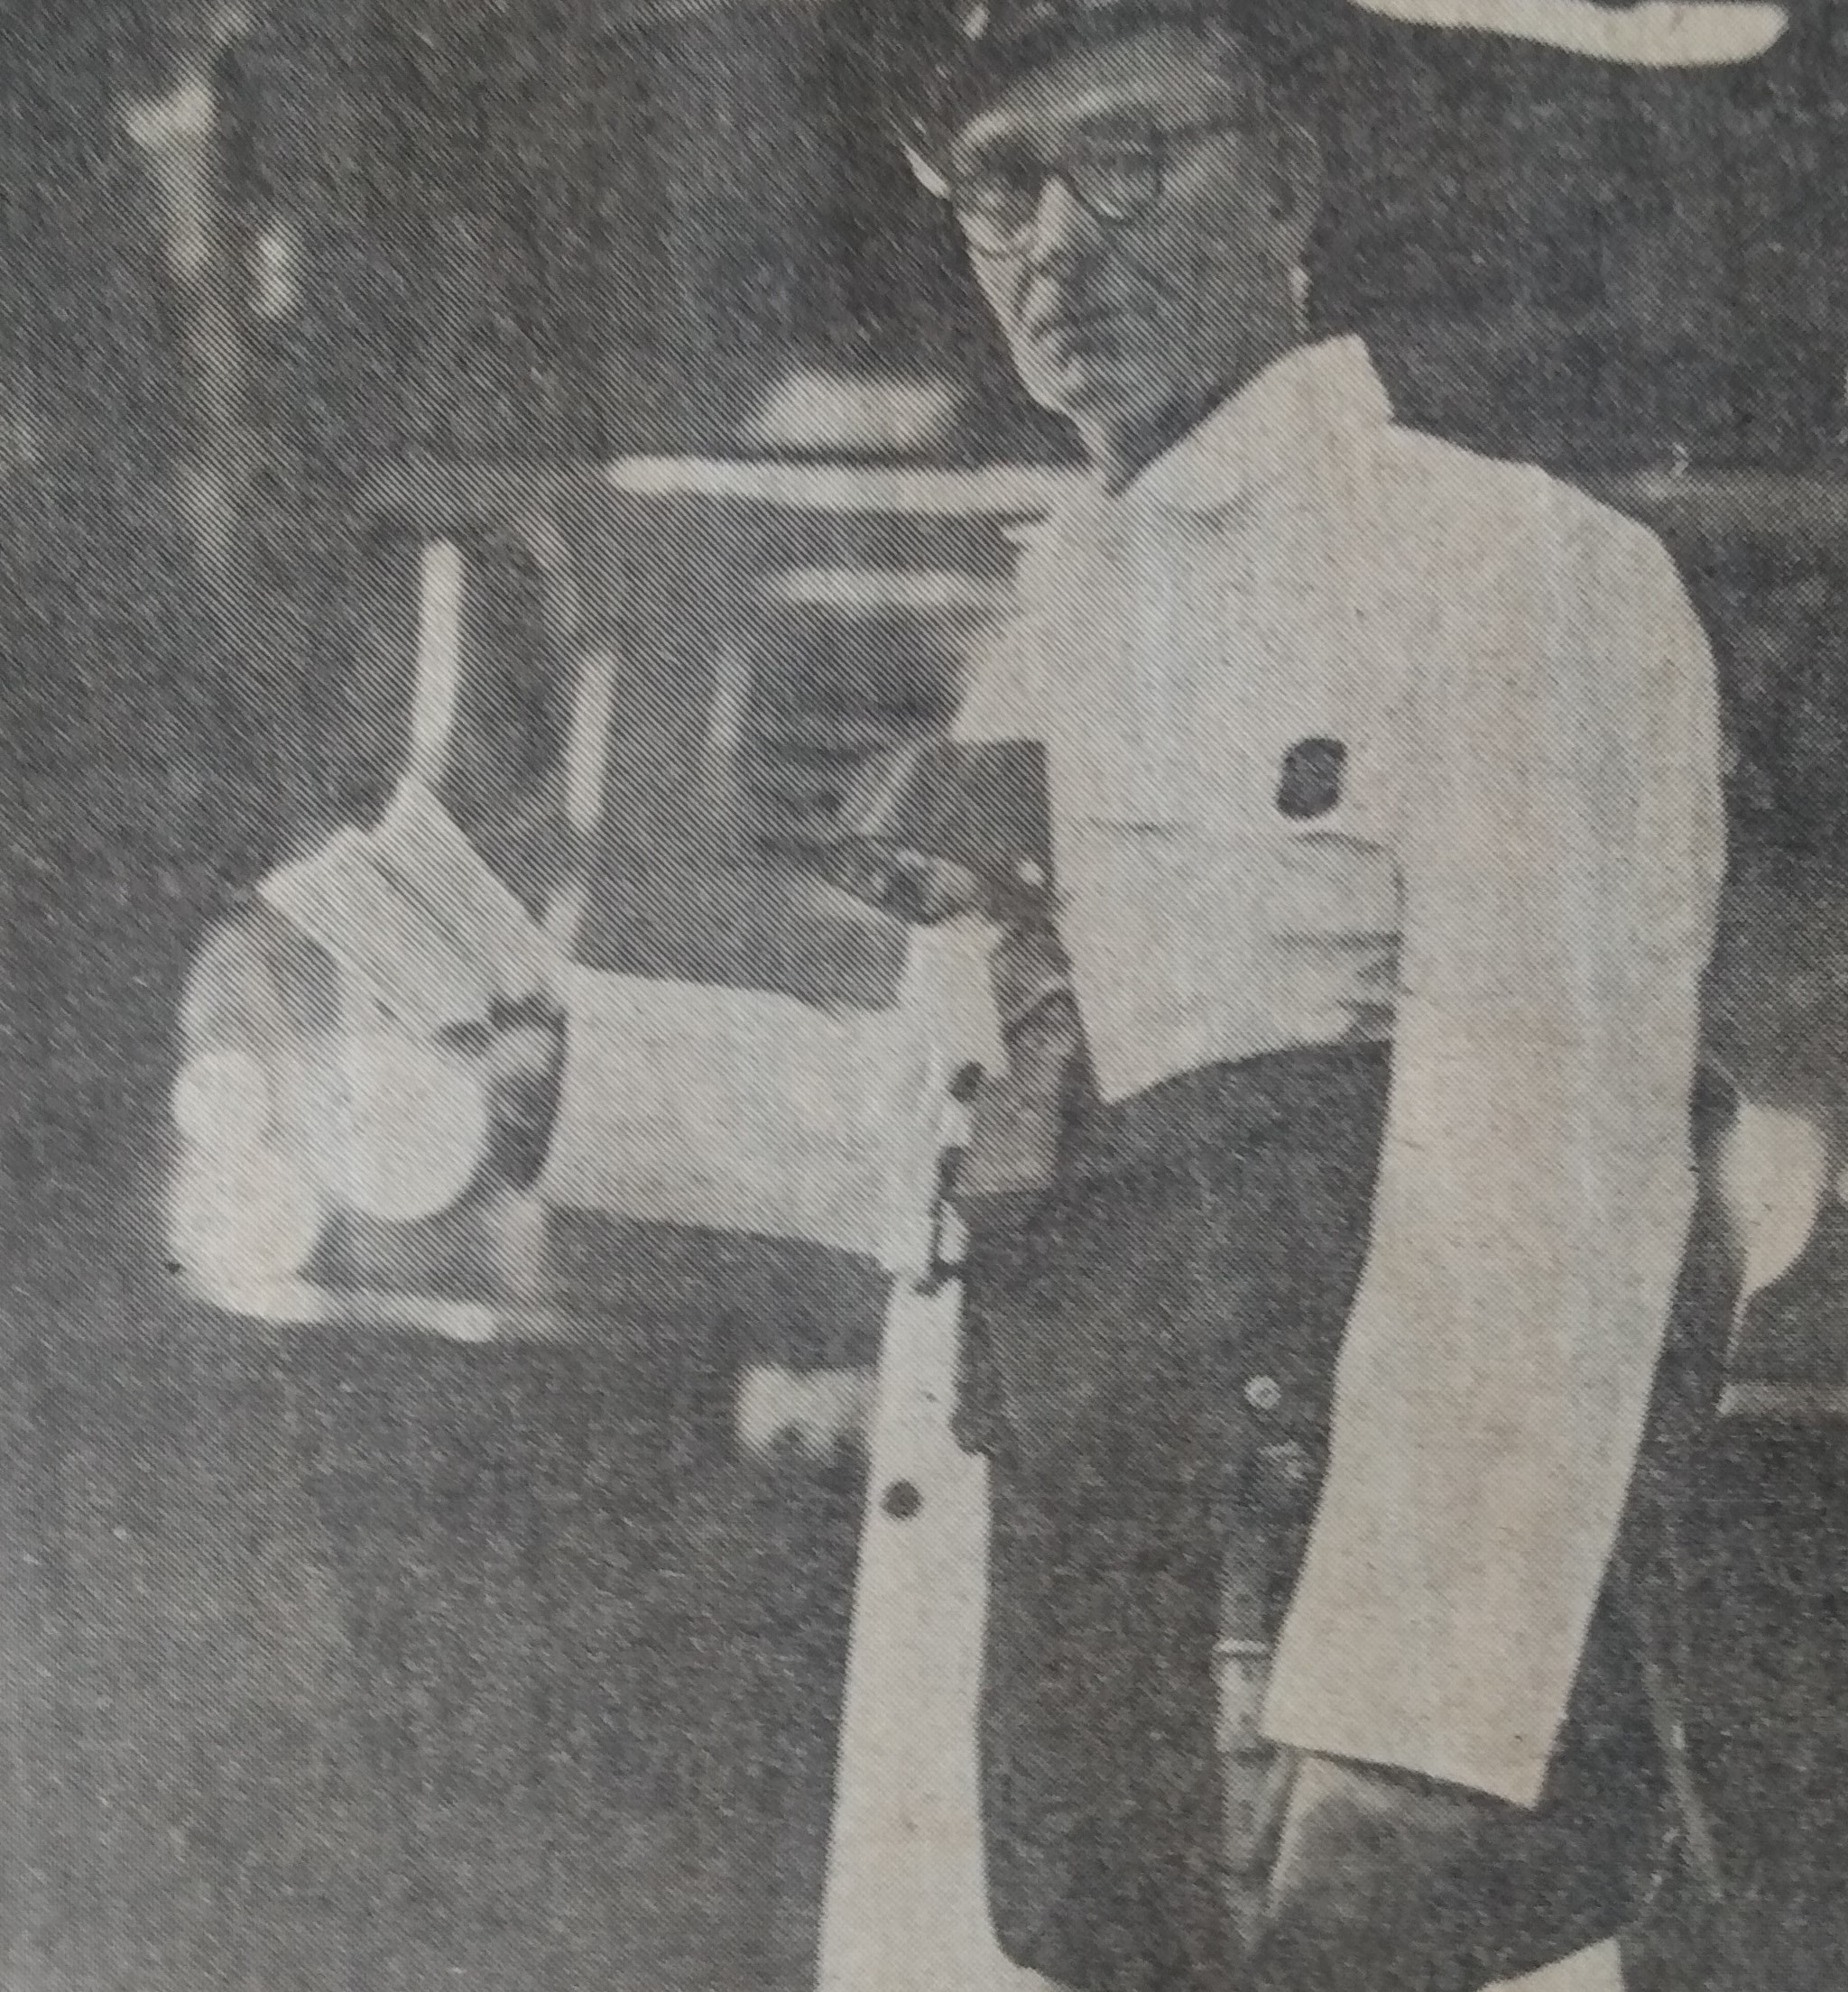 November 1971 and Worcester postman Sid Hames is pictured wearing his new white livery, designed to make mailmen easier for motorists to make out on dark winter mornings